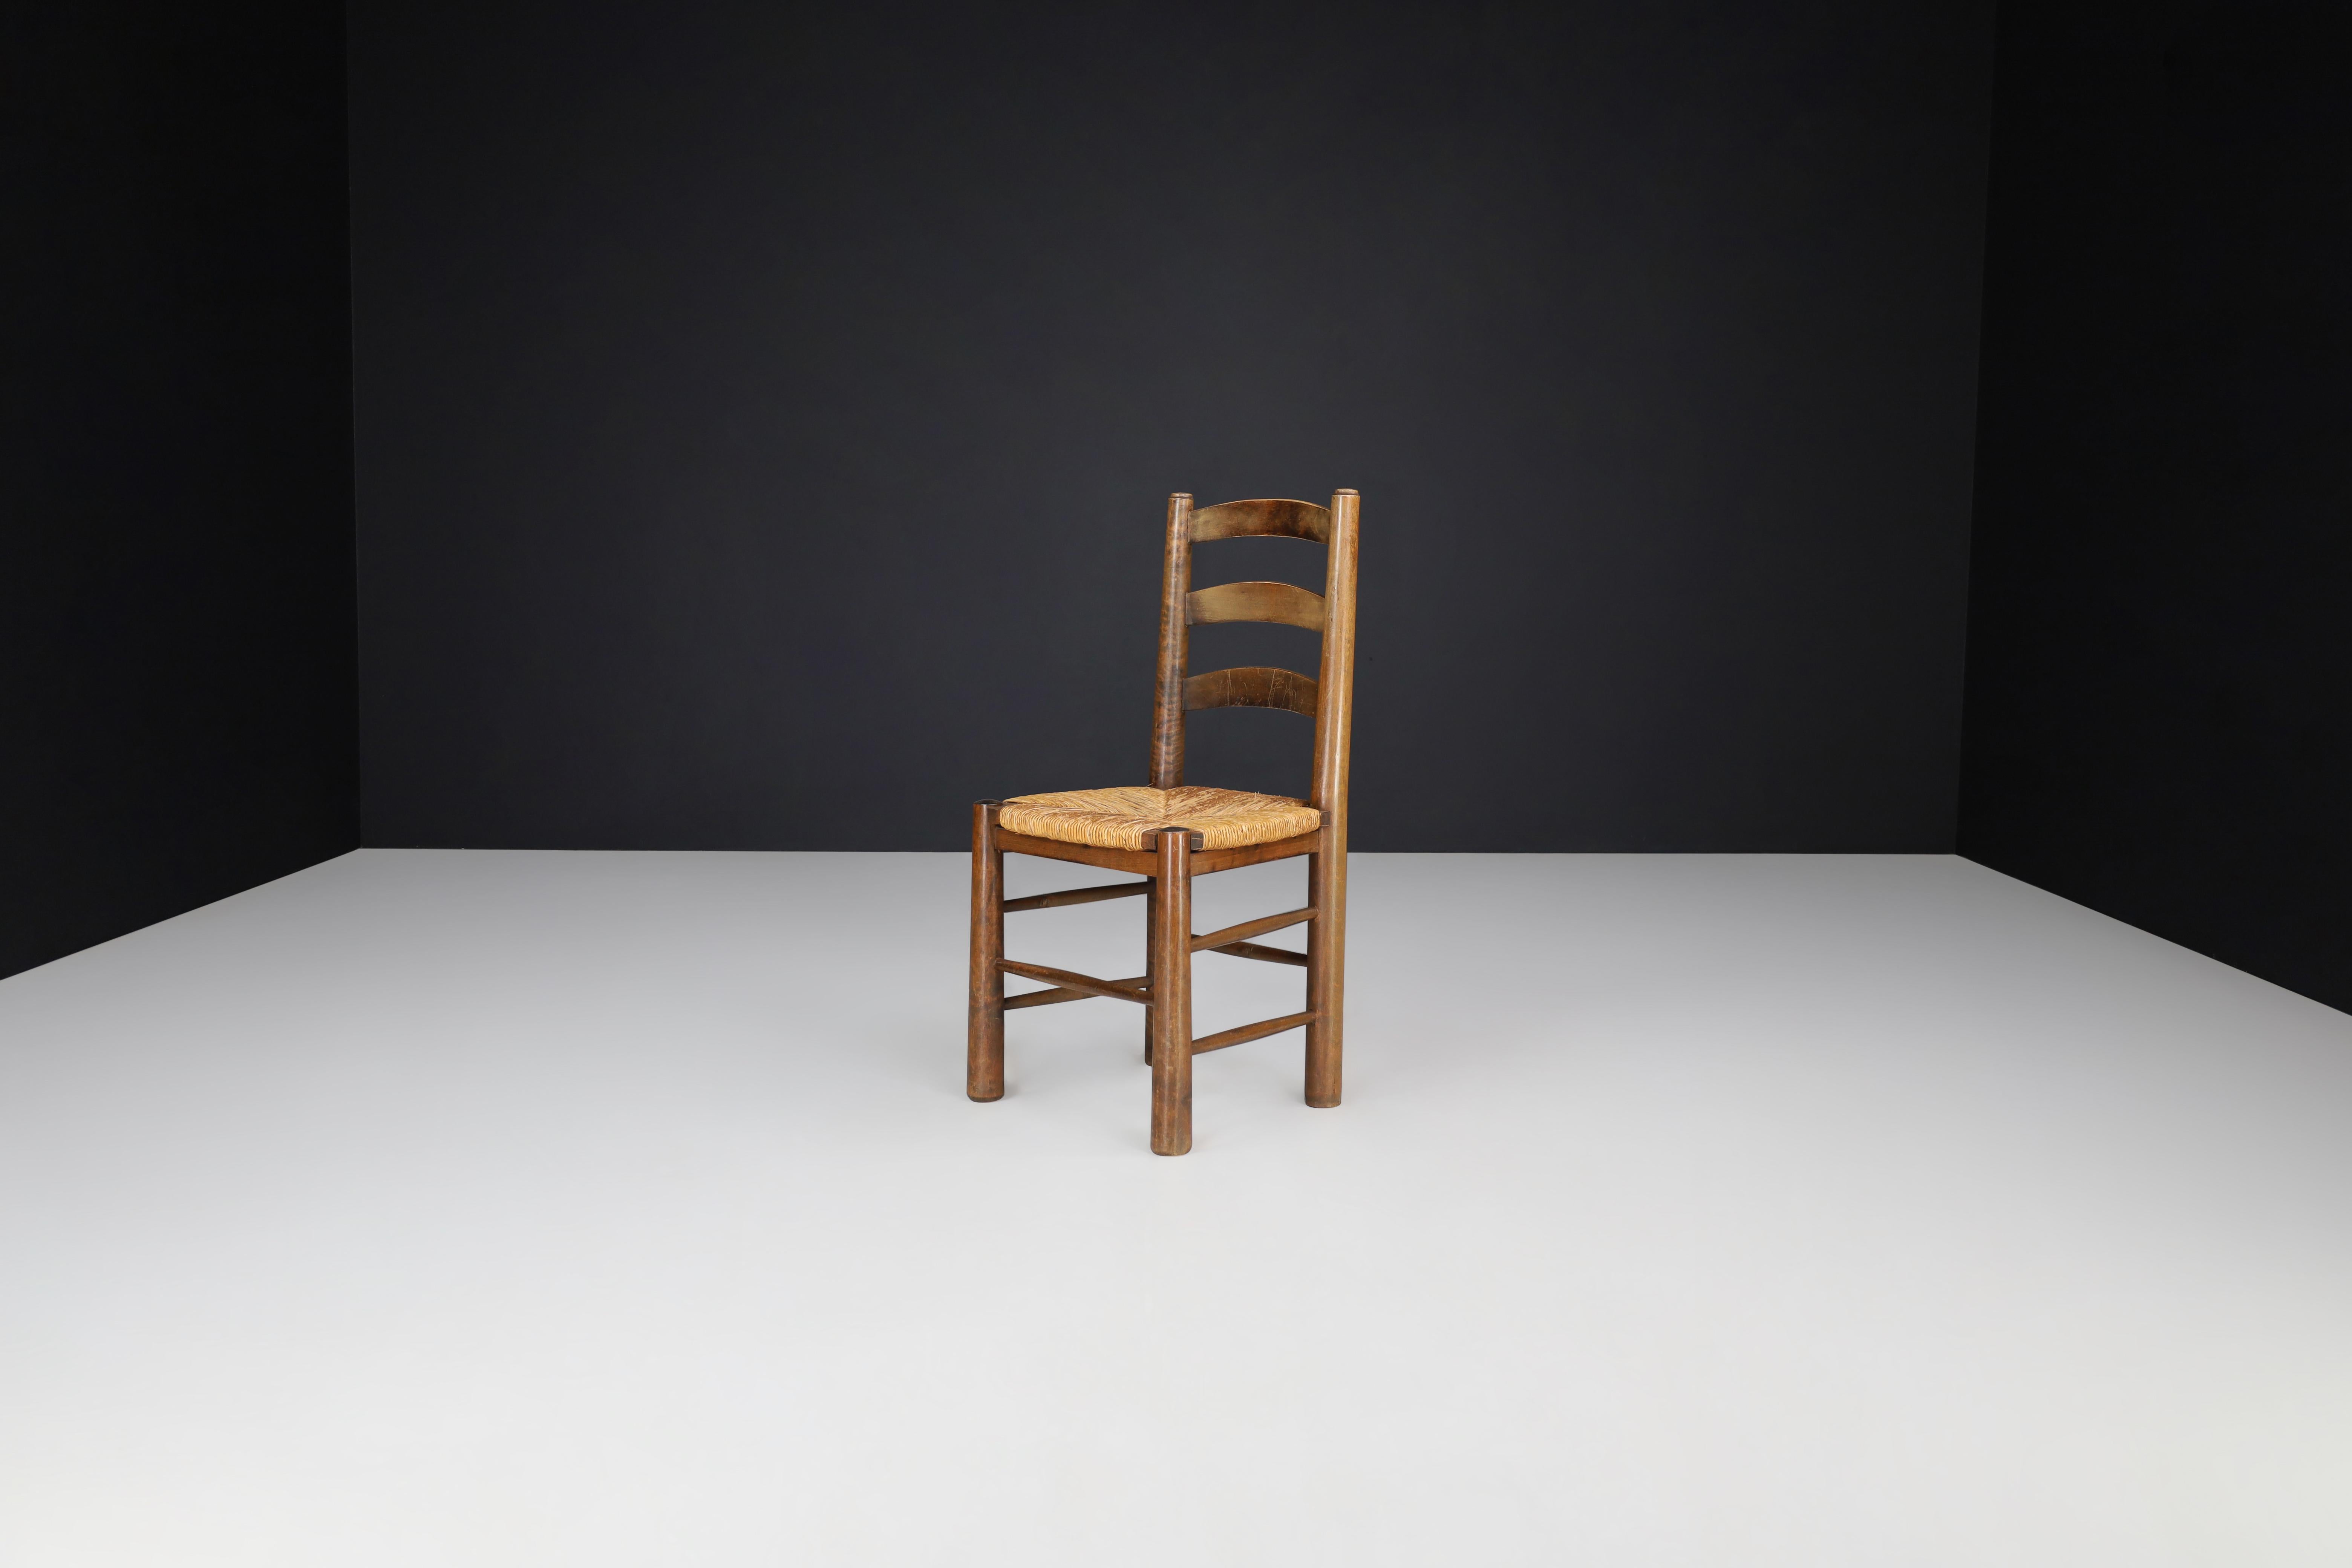 Georges Robert Chalet Chairs in Oak and Rush, France, 1950s For Sale 1